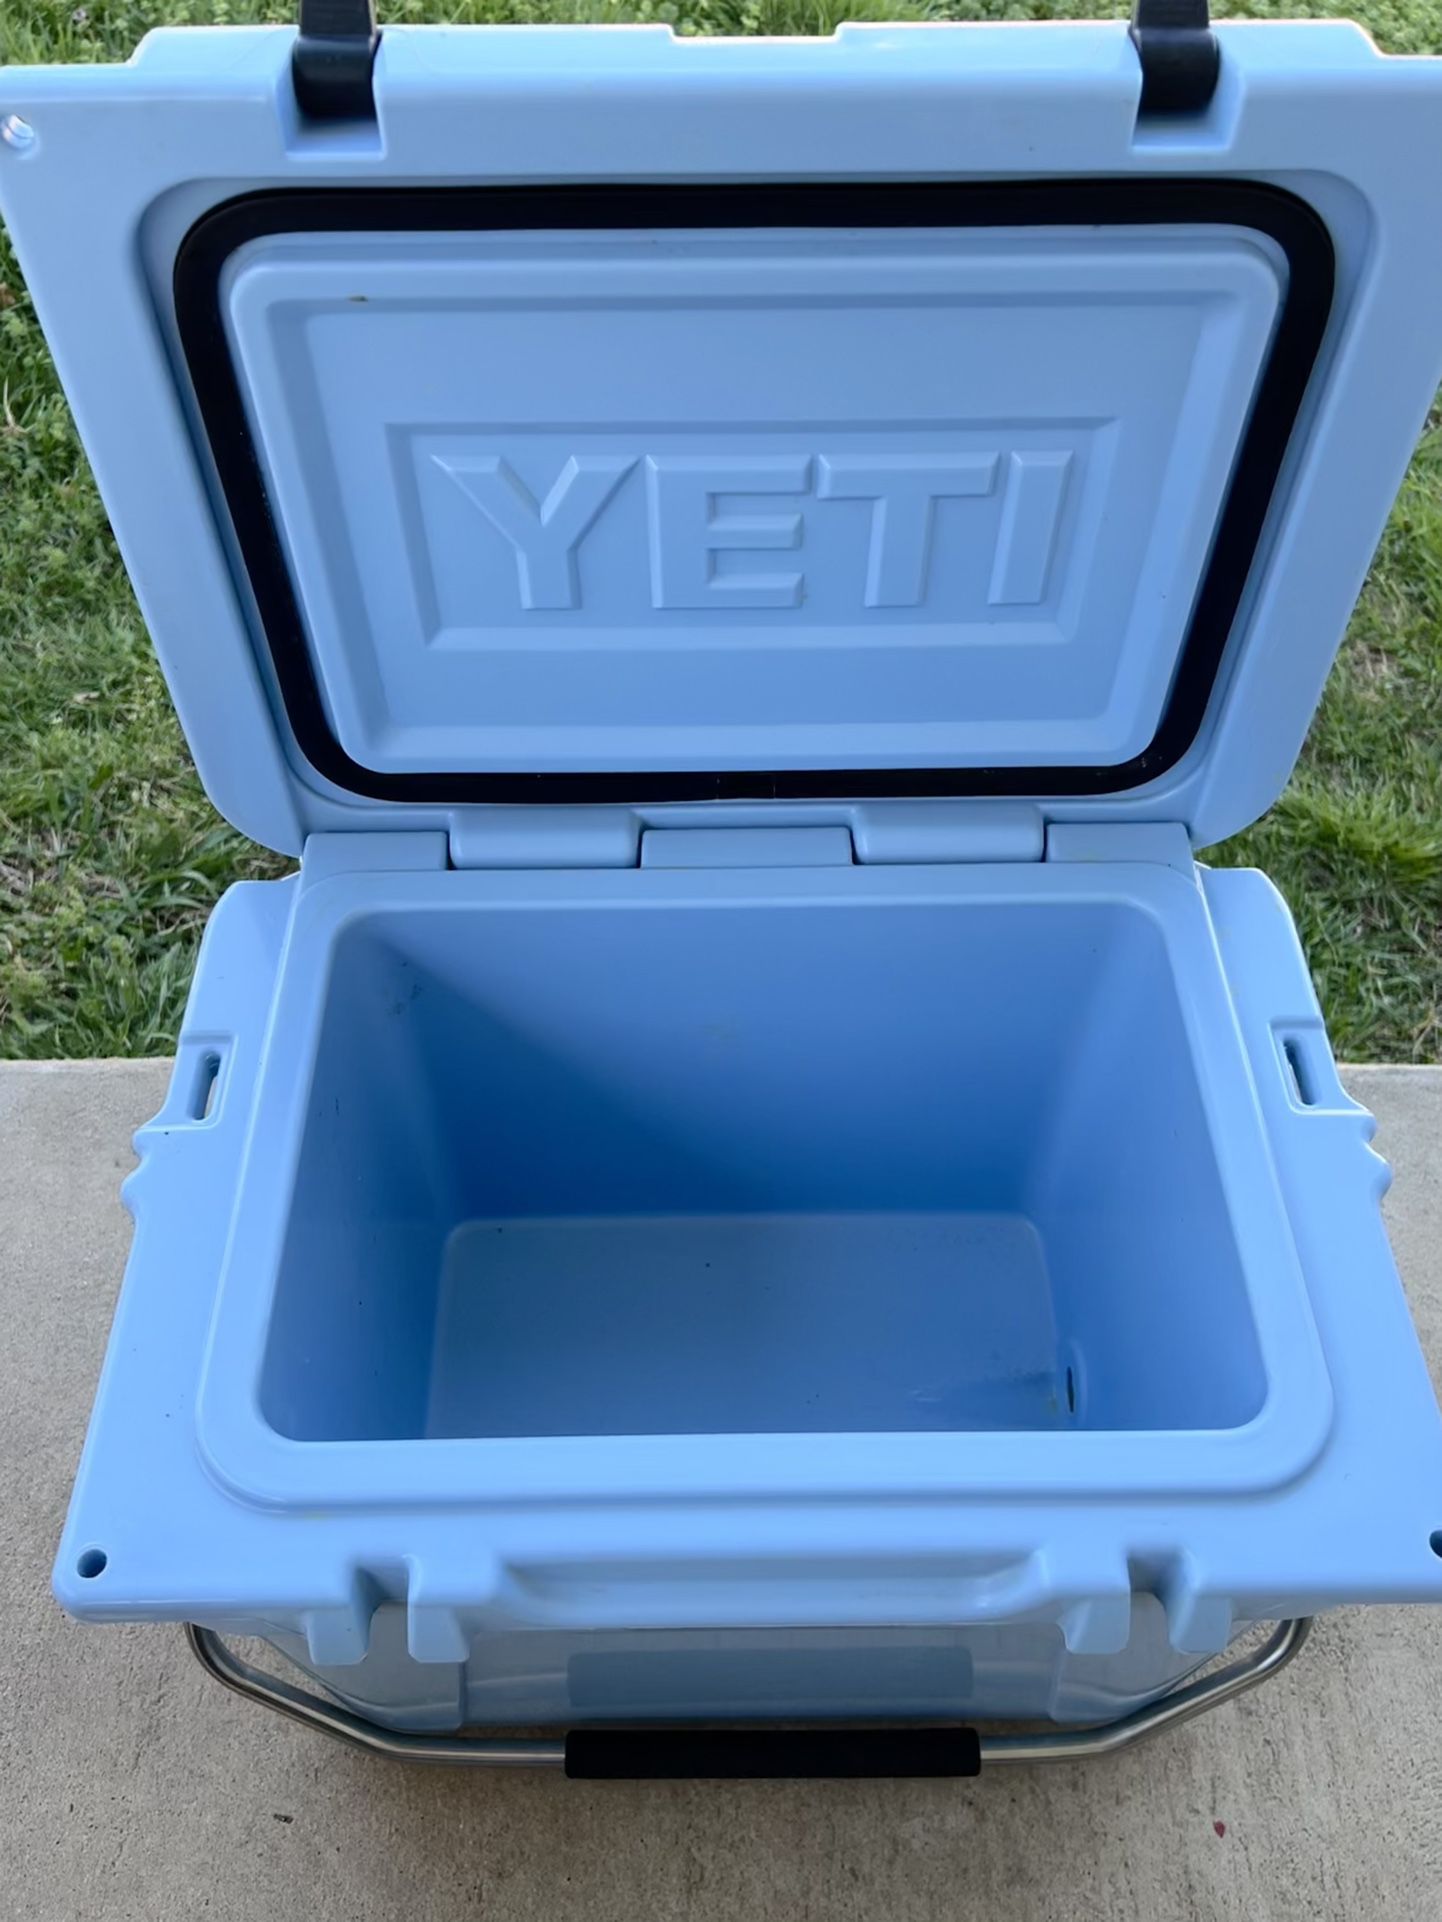 YETI Roadie 20 Hard Cooler Coral Limited Edition RARE for Sale in Upper  Arlngtn, OH - OfferUp